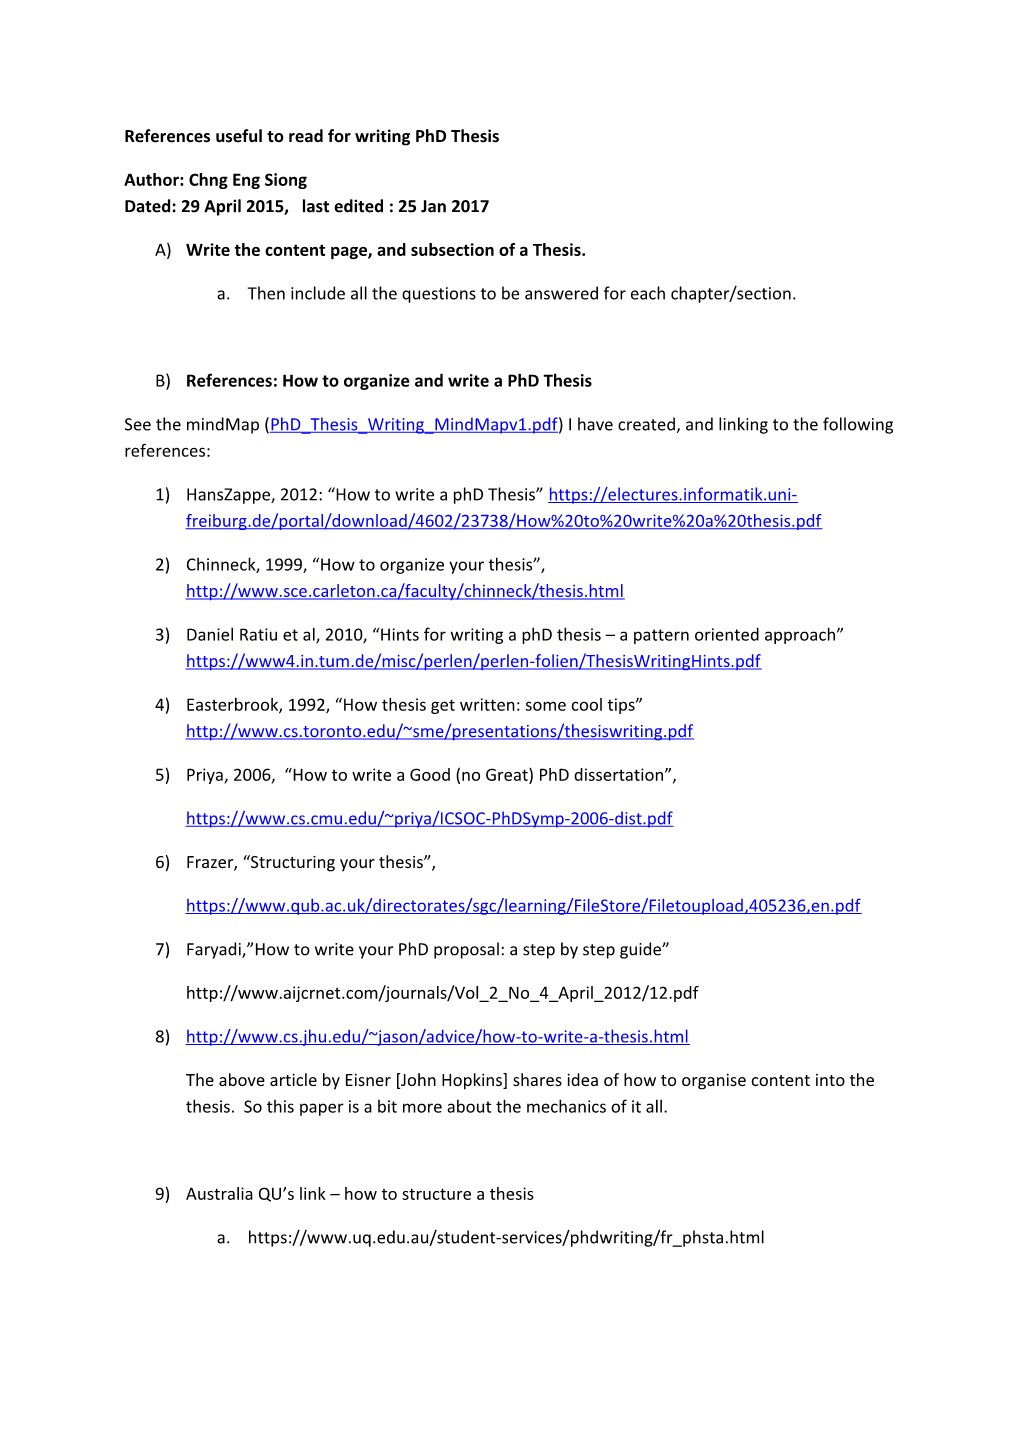 References Useful to Read for Writing Phd Thesis